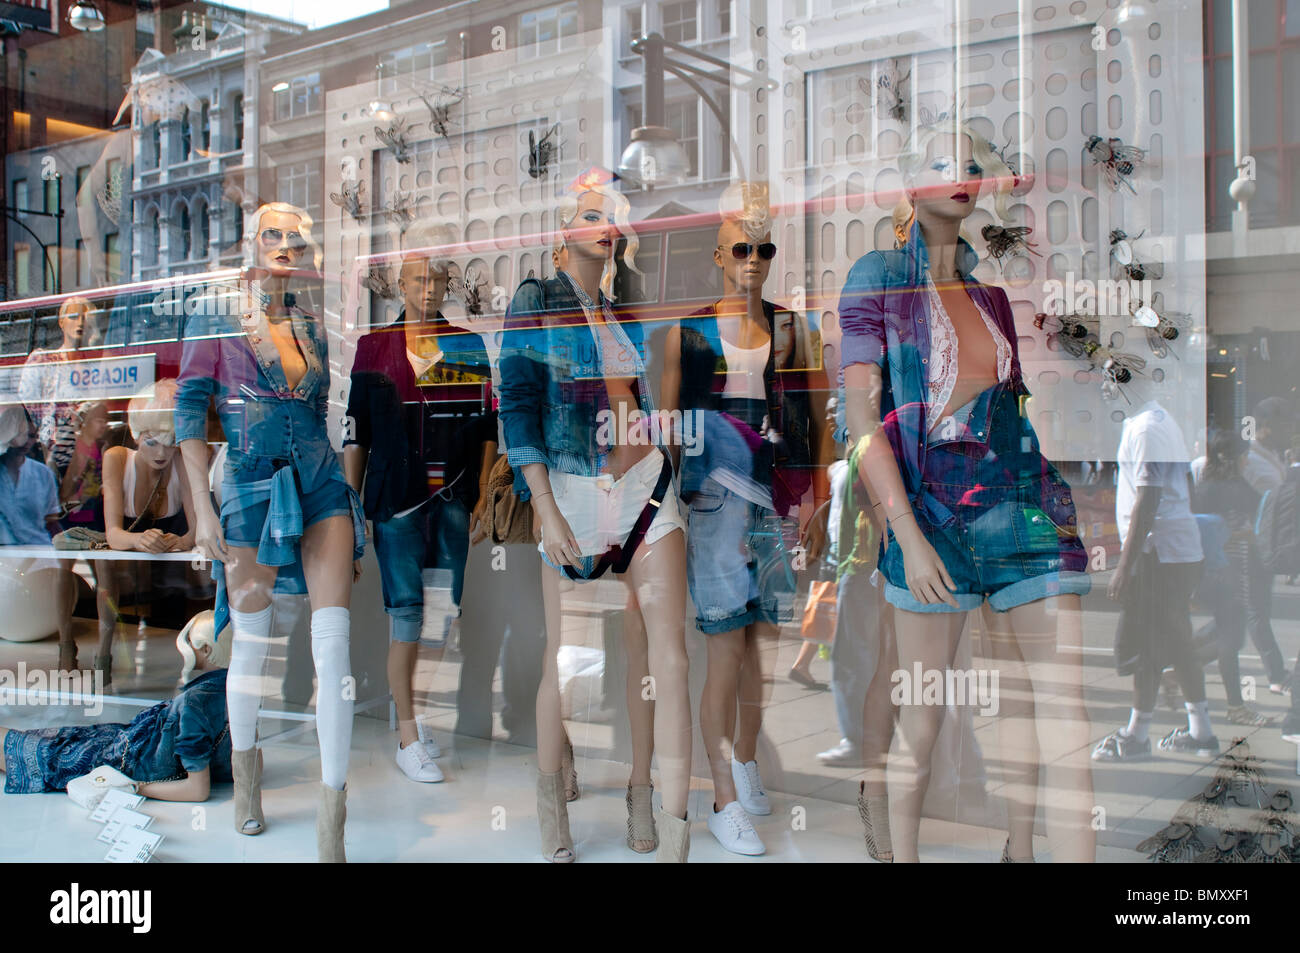 Zara shop london hi-res stock photography and images - Alamy